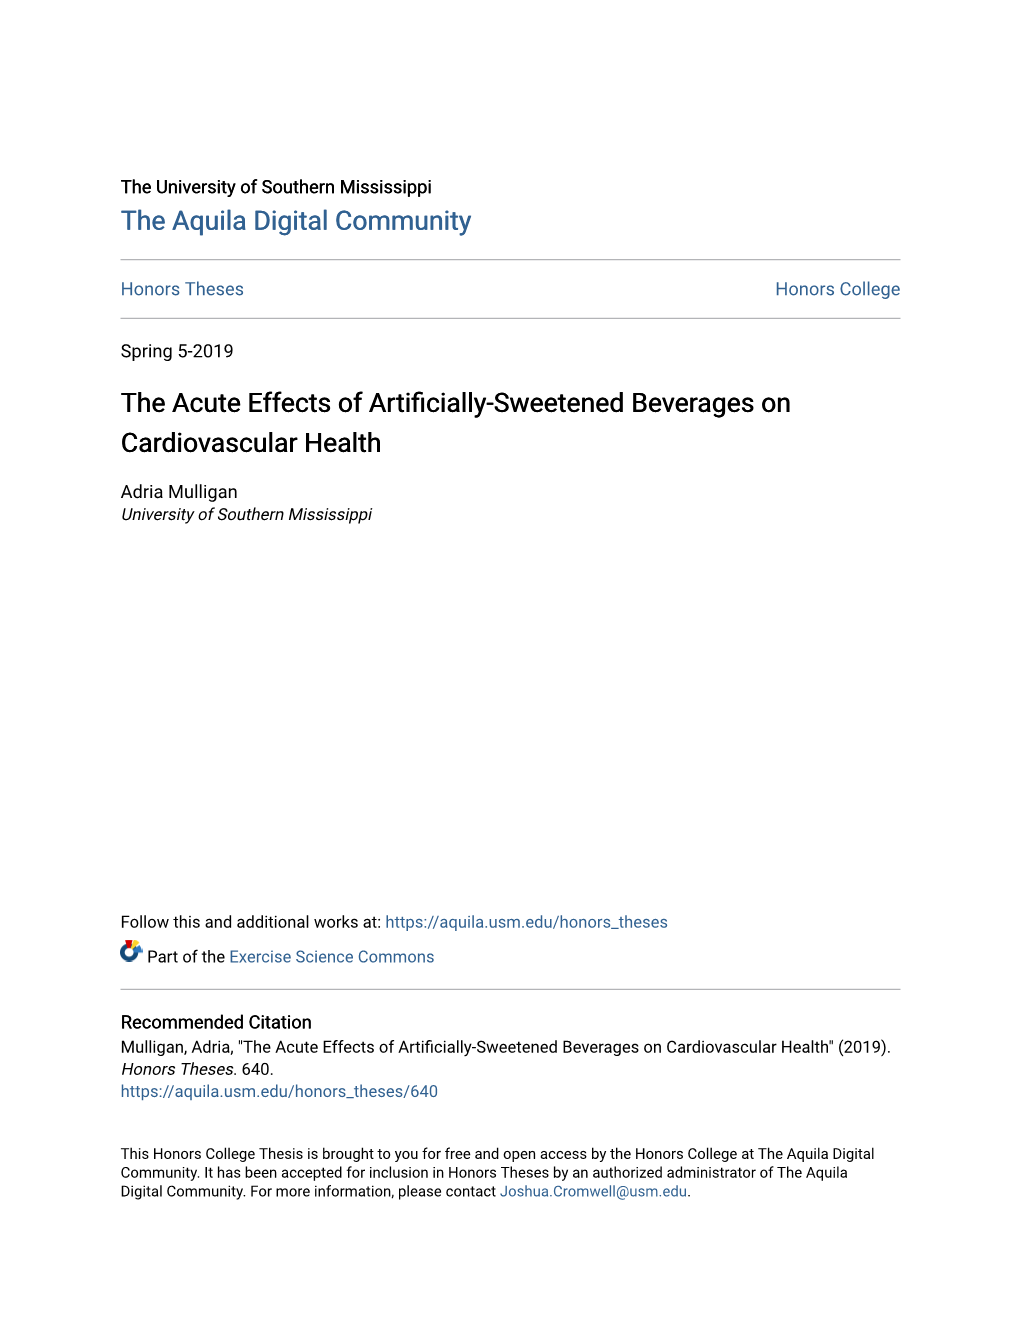 The Acute Effects of Artificially-Sweetened Beverages on Cardiovascular Health